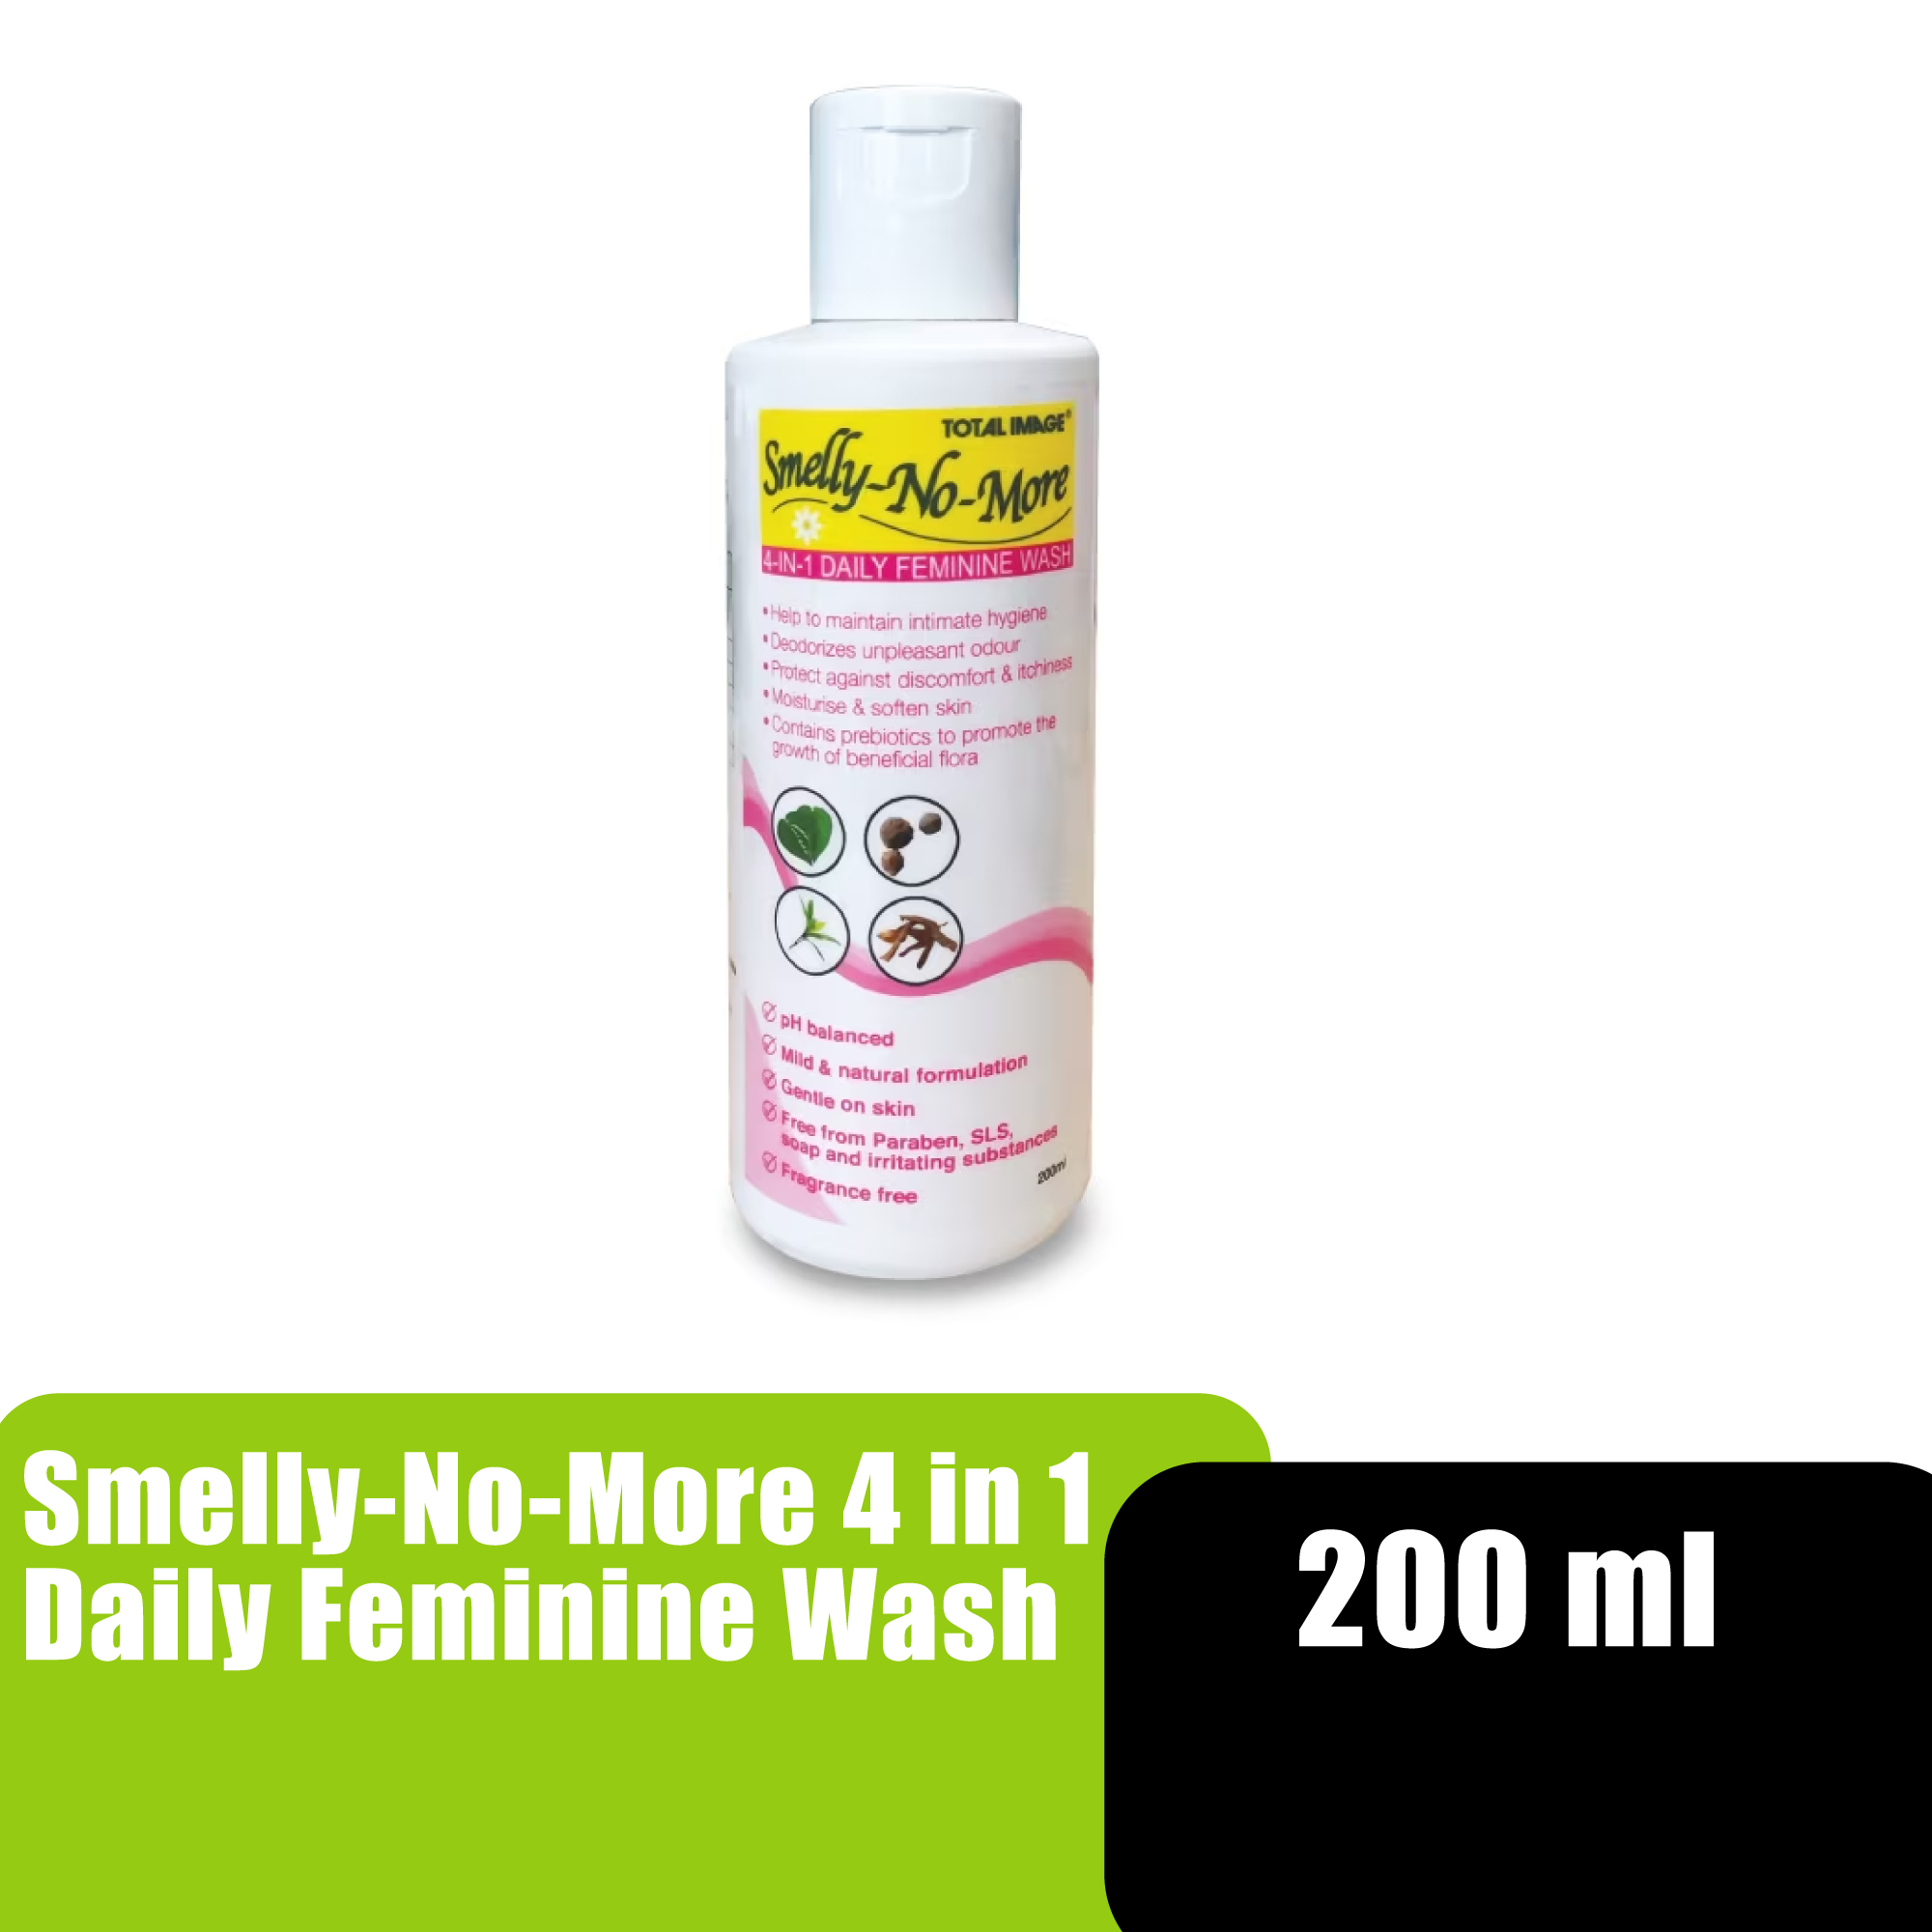 SMELLY NO MORE 4 IN 1 DAILY FEMININE WASH 200ML